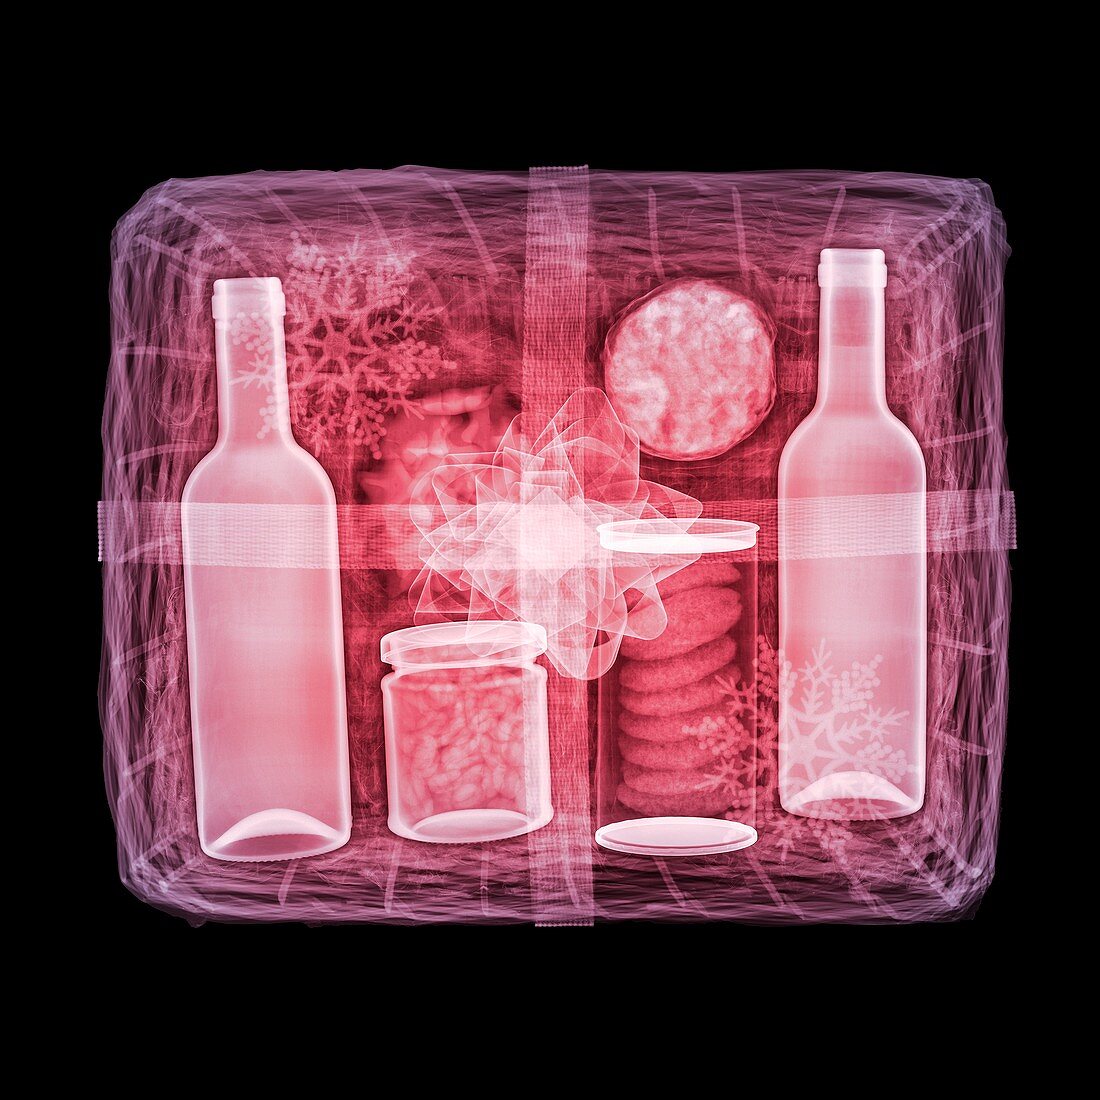 Coloured x-ray of a Christmas hamper